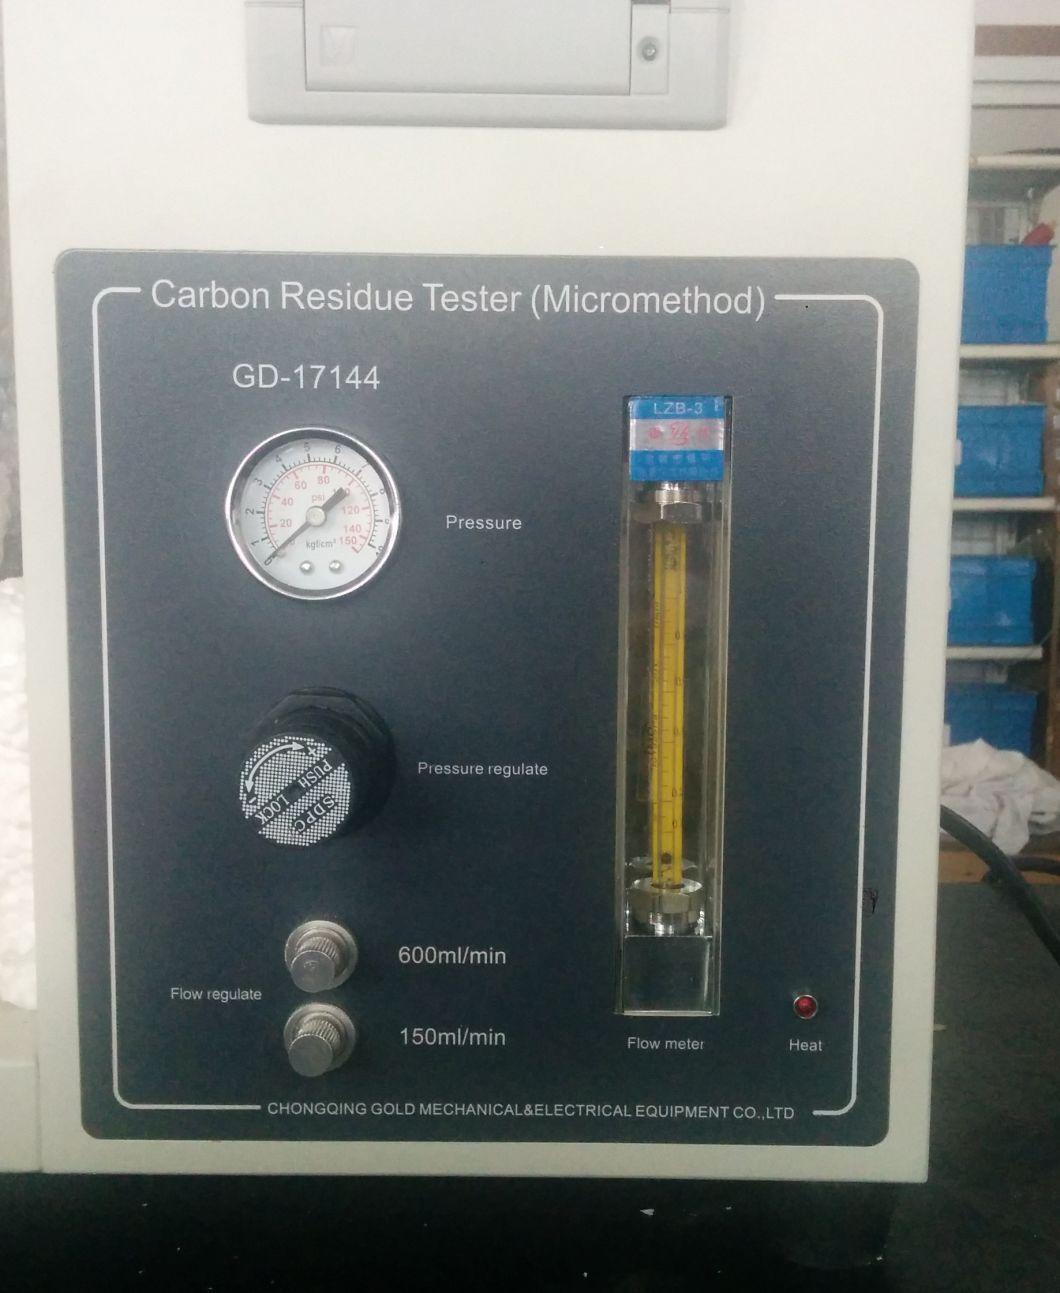 Gd-17144 Micro Method Carbon Residue Tester ASTM D4530